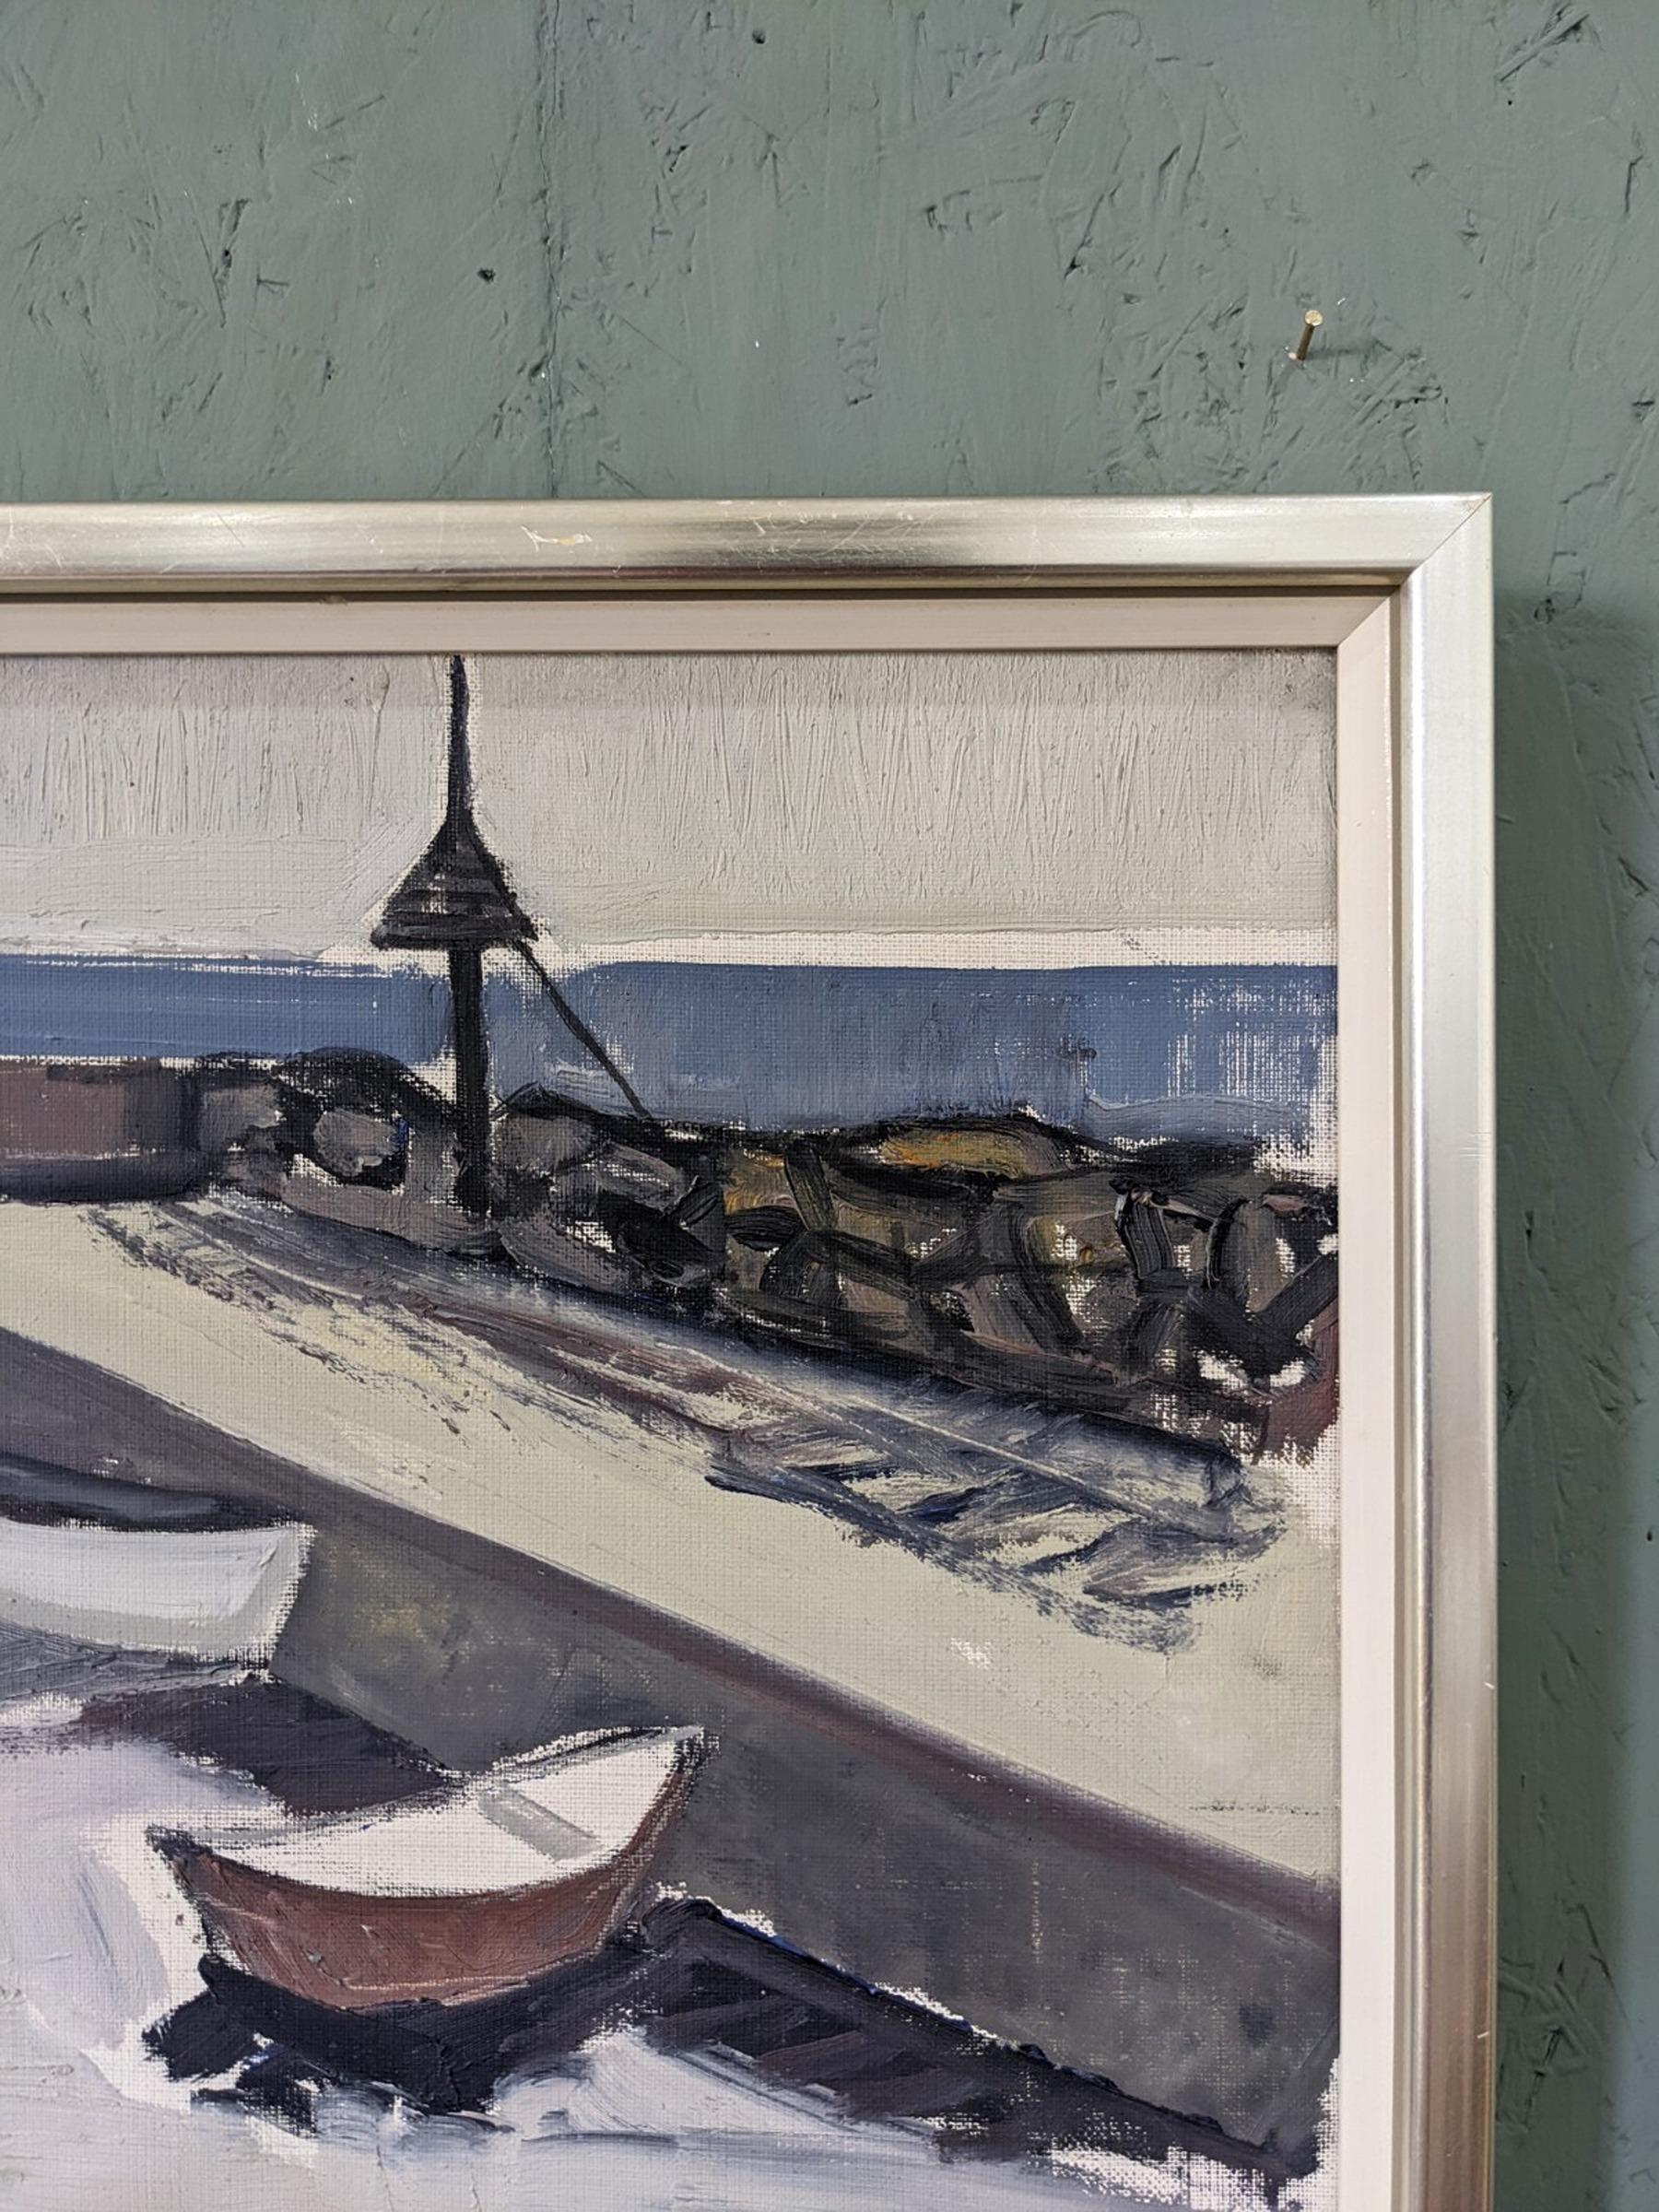 BOATS AT THE JETTY
Size: 34 x 70 cm (including frame)
Oil on Canvas

A restful and very confidently executed mid-century coastal landscape composition, executed in oil onto canvas.

The painting presents a picturesque scene, capturing the tranquil